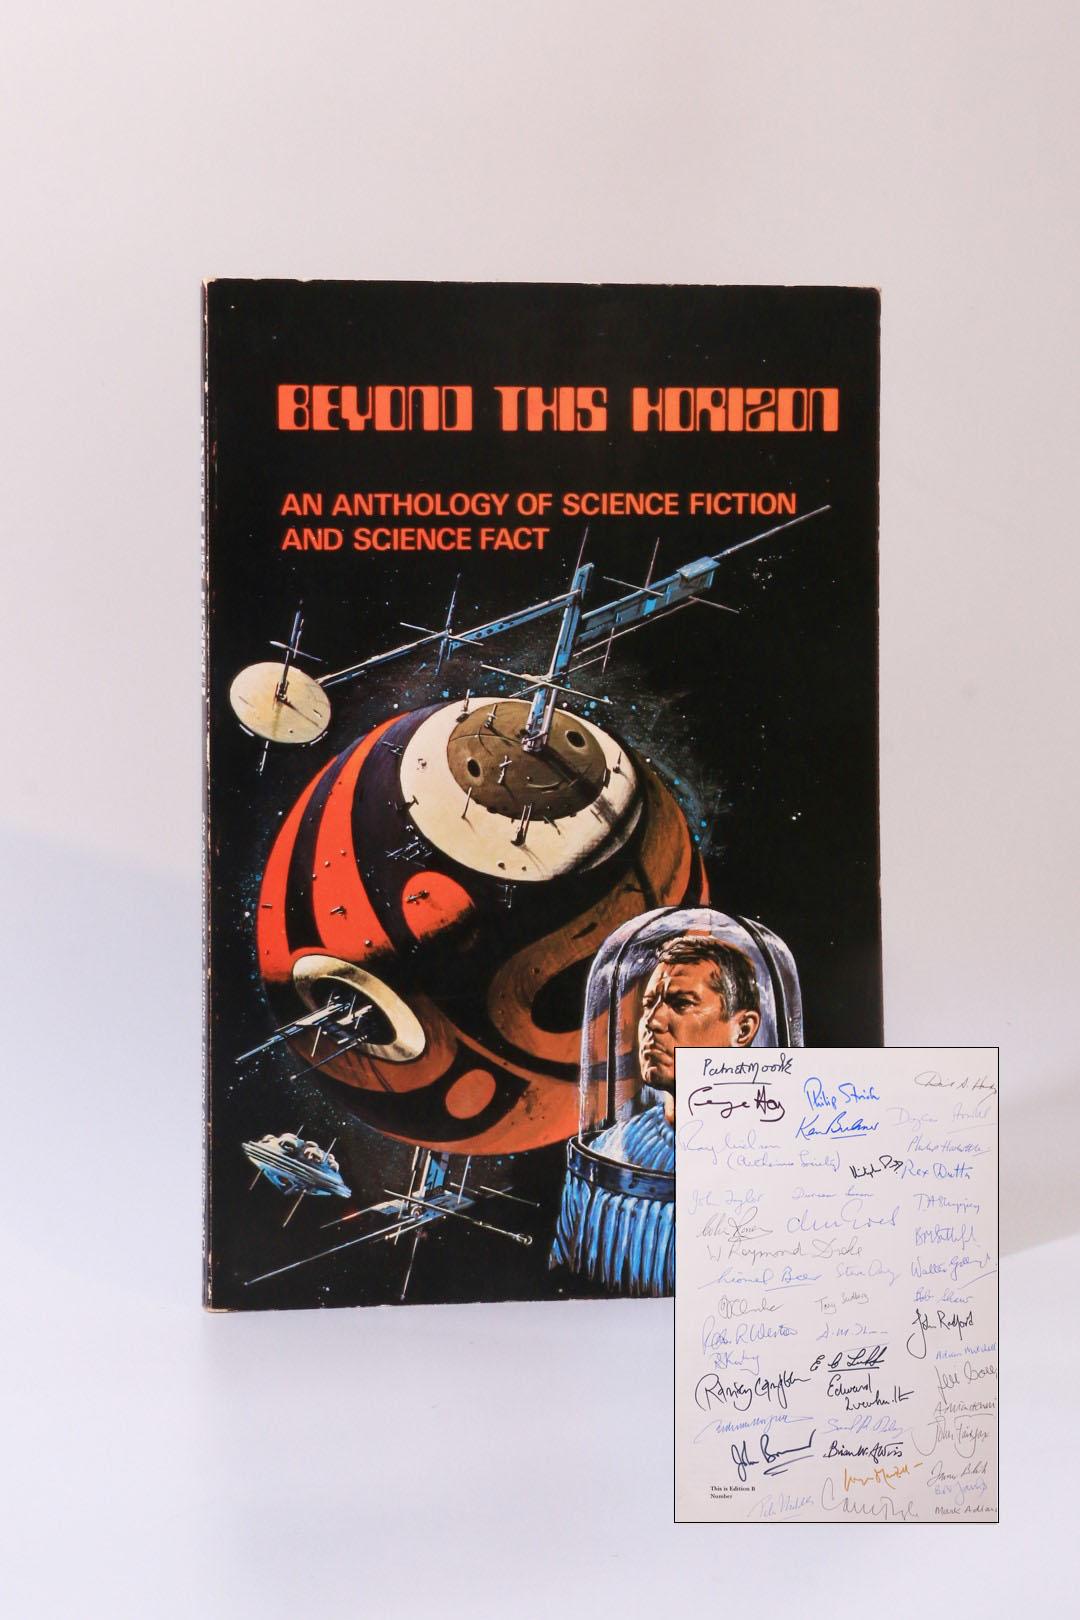 Christopher Carroll - Beyond this Horizon: An Anthology of Science Fiction and Science Fact - Ceolfrith Press, 1973, Signed Limited Edition.